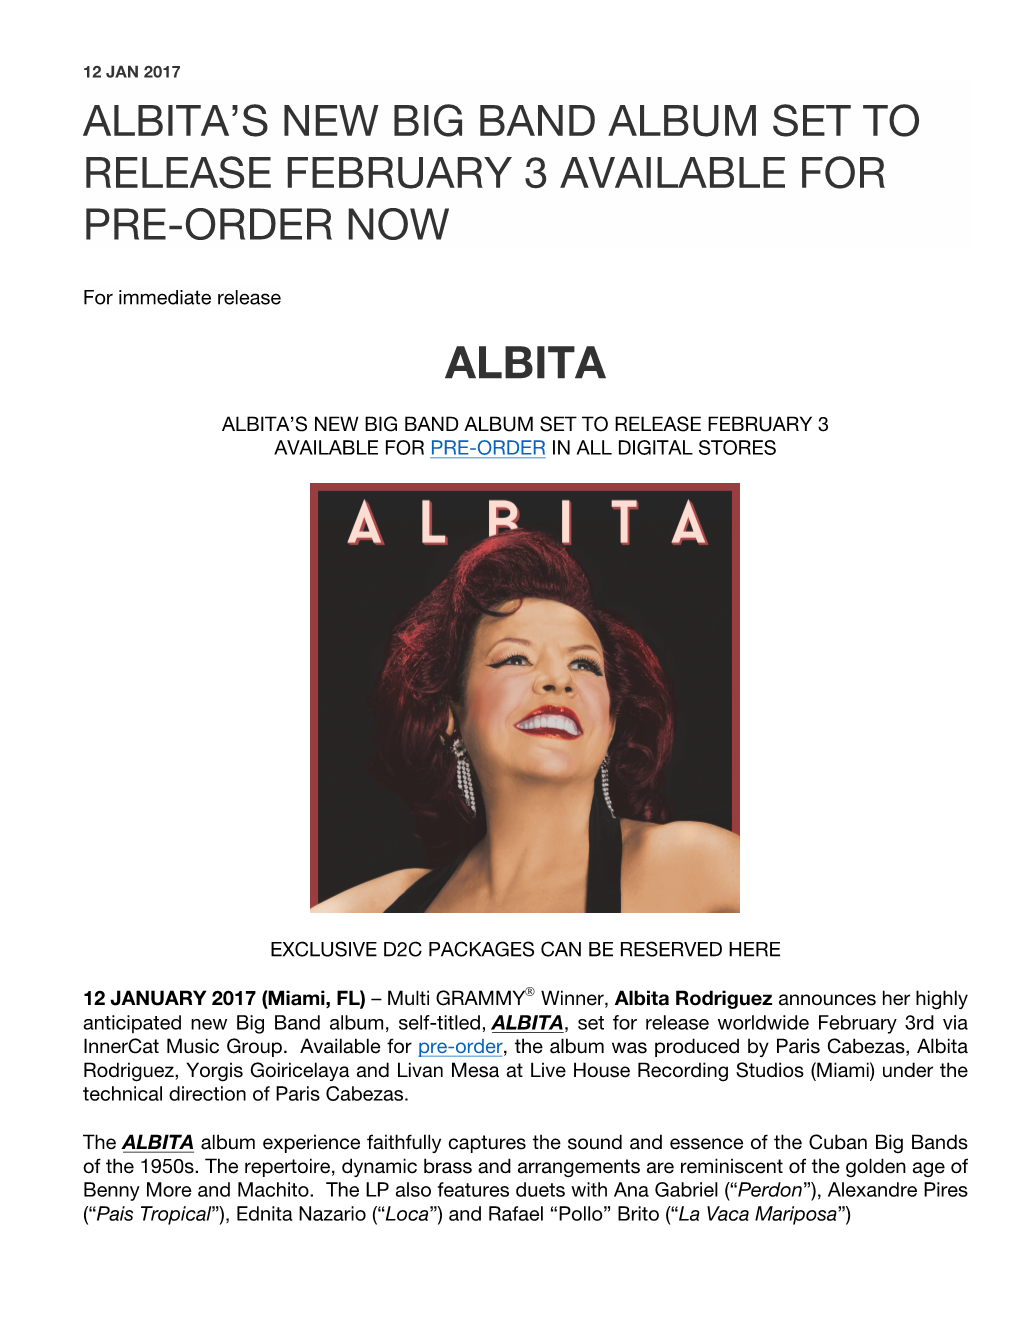 Albita's New Big Band Album Set to Release February 3 Available for Pre